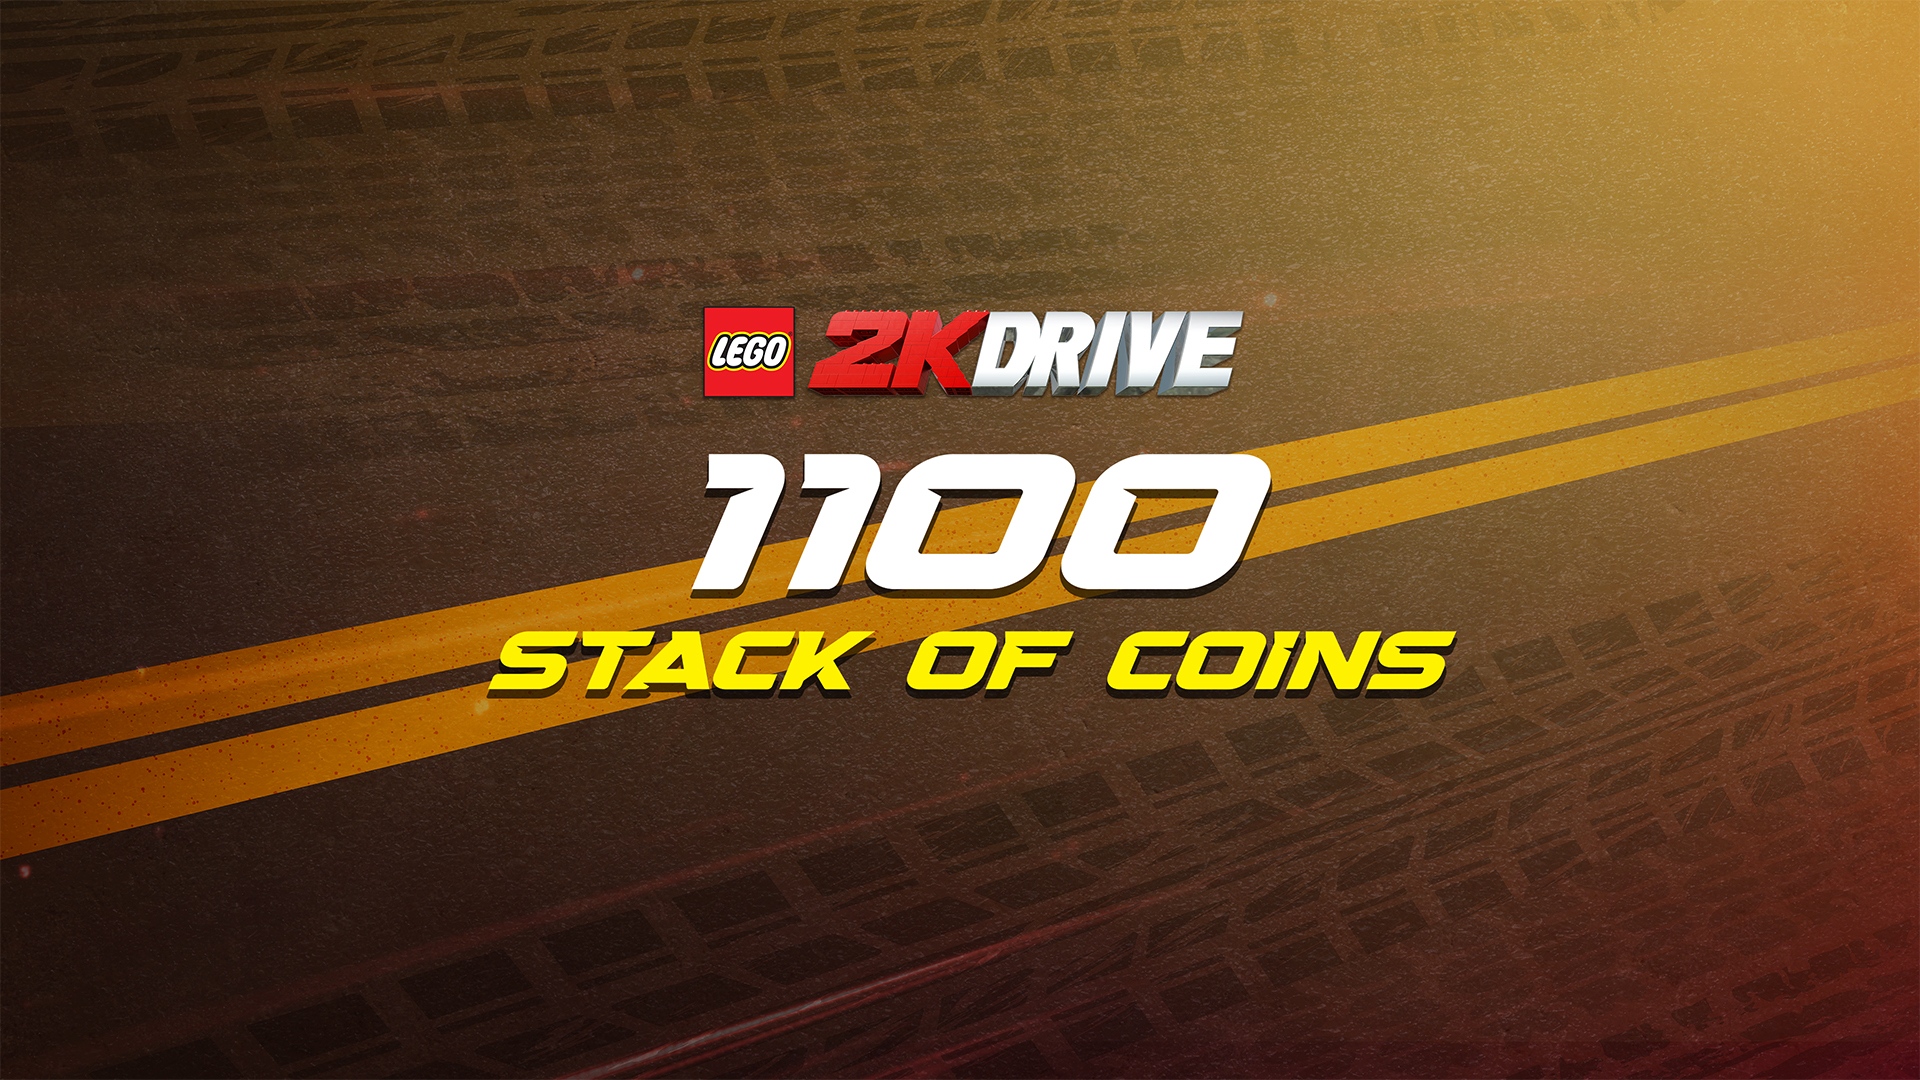 LEGO 2K Drive - Stack of Coins XBOX One / Xbox Series X|S CD Key 10.42 USD